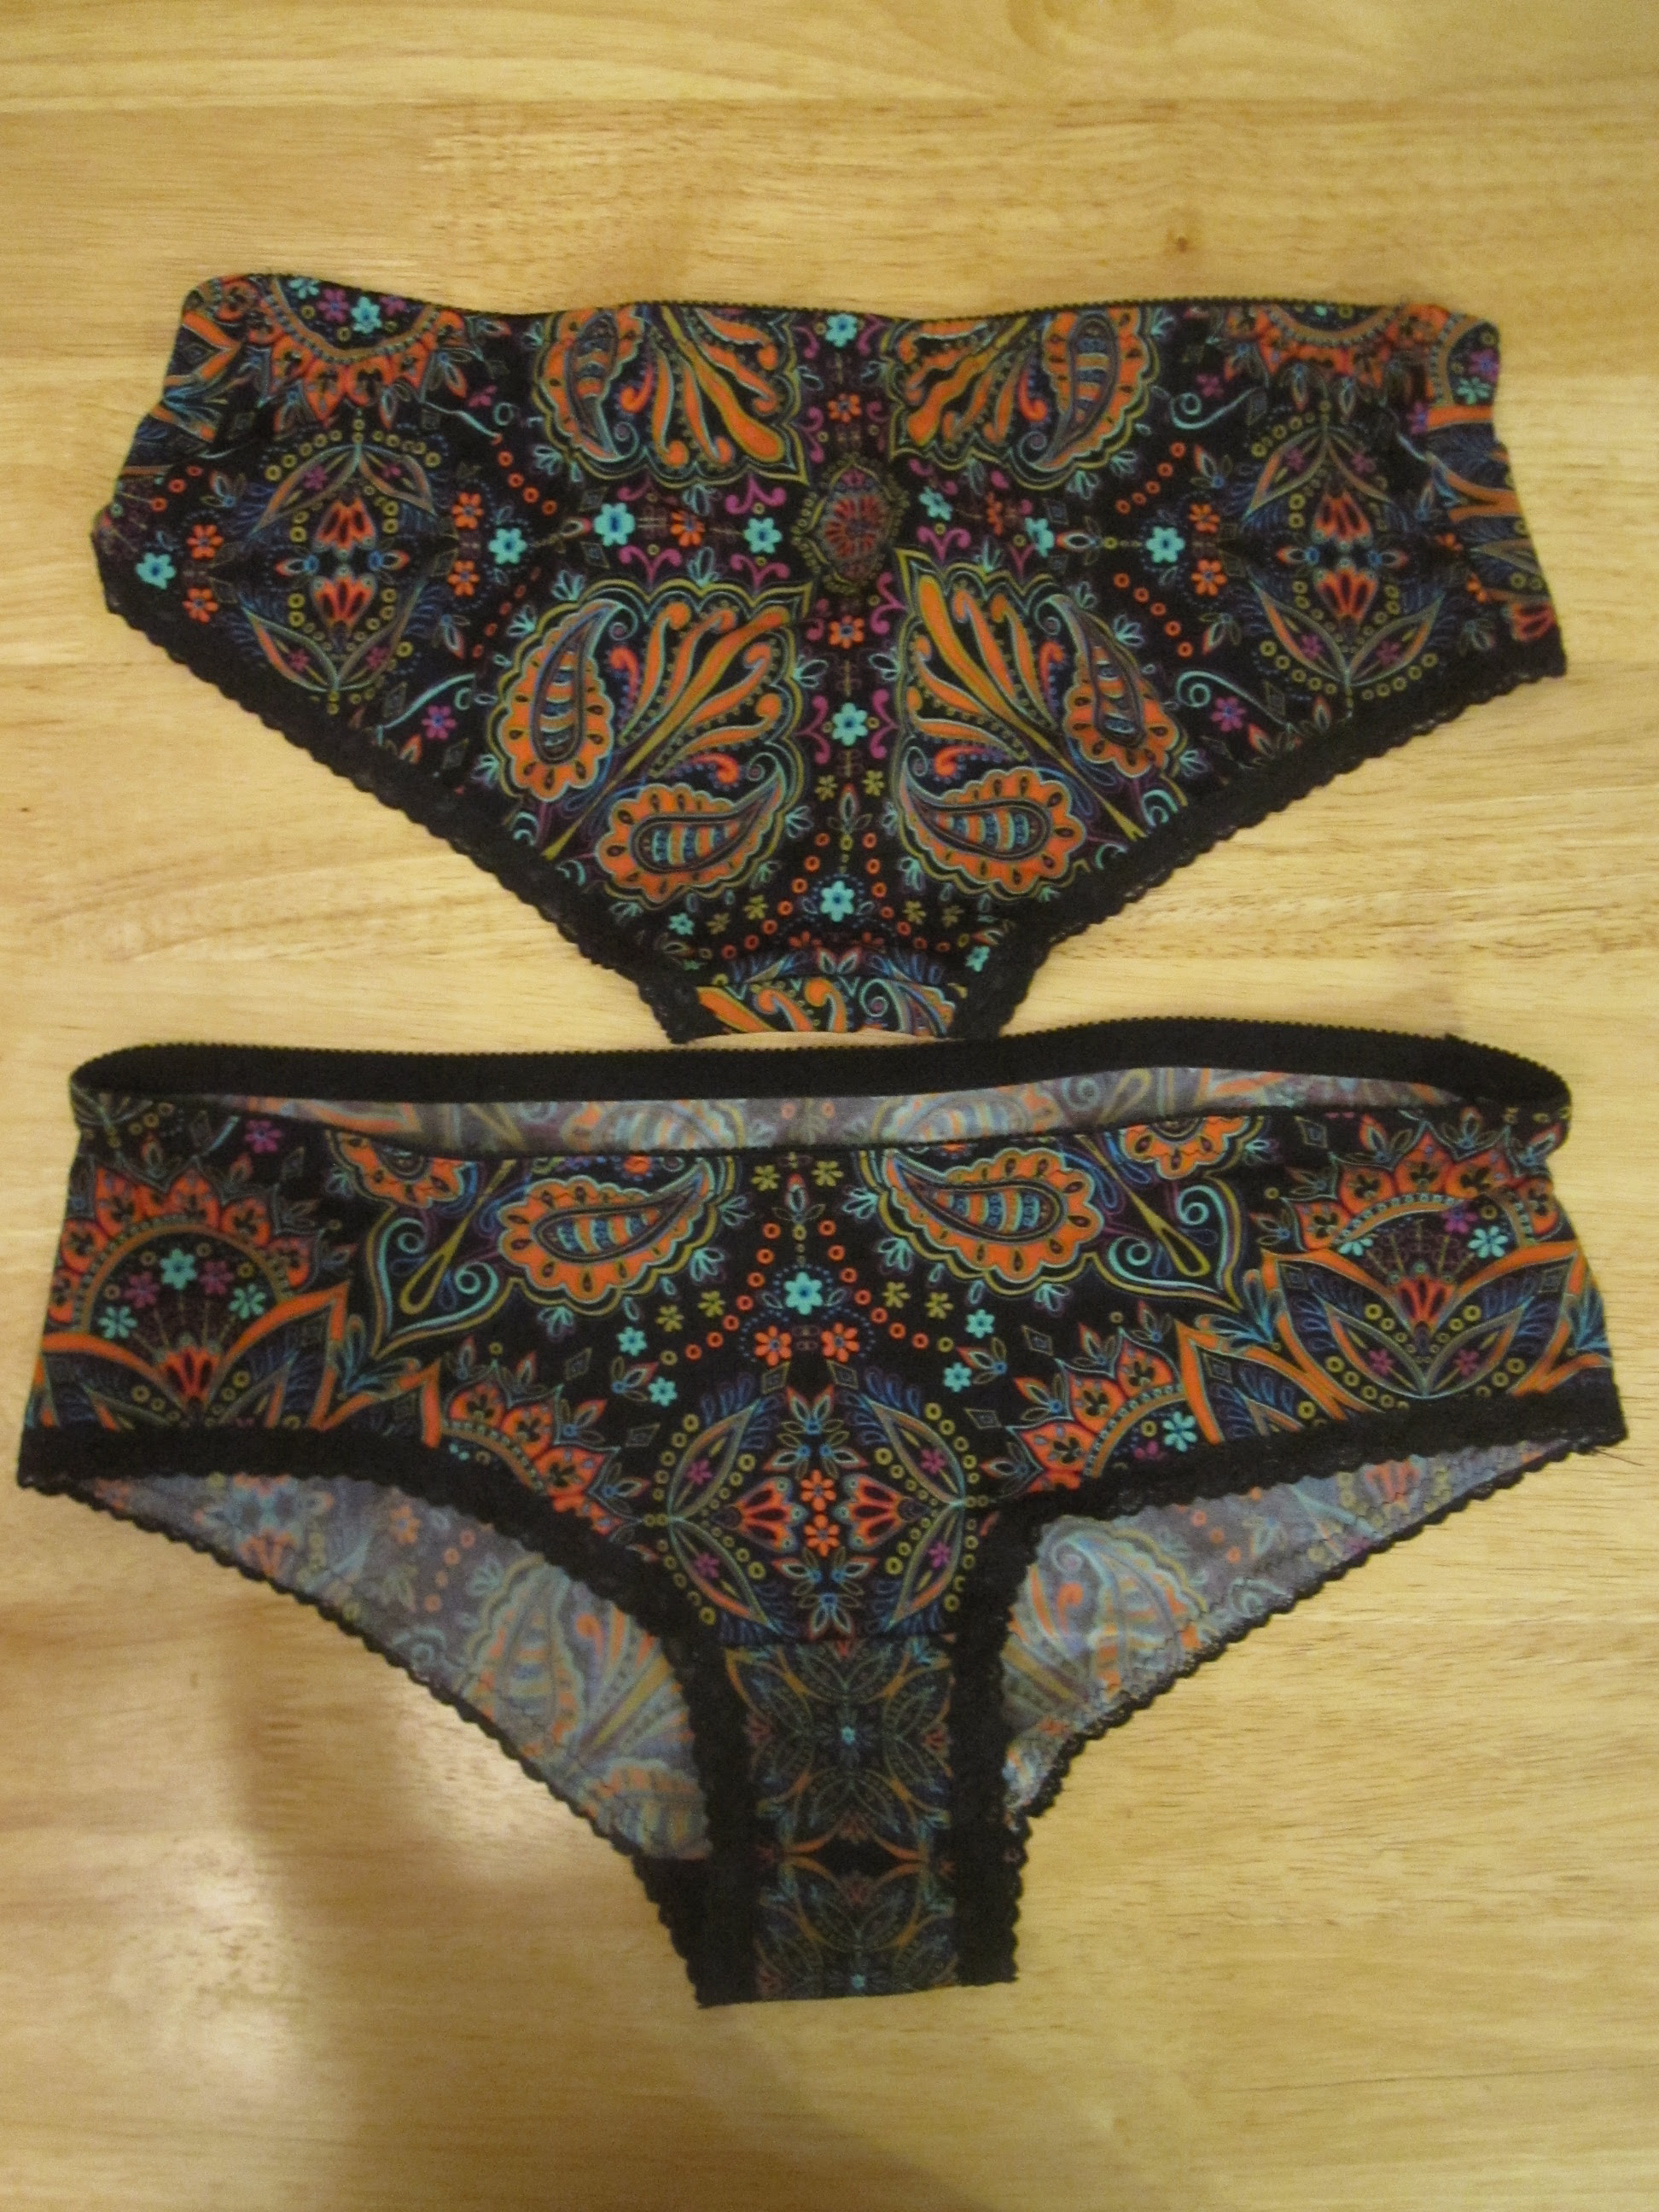 Knickers from Scraps